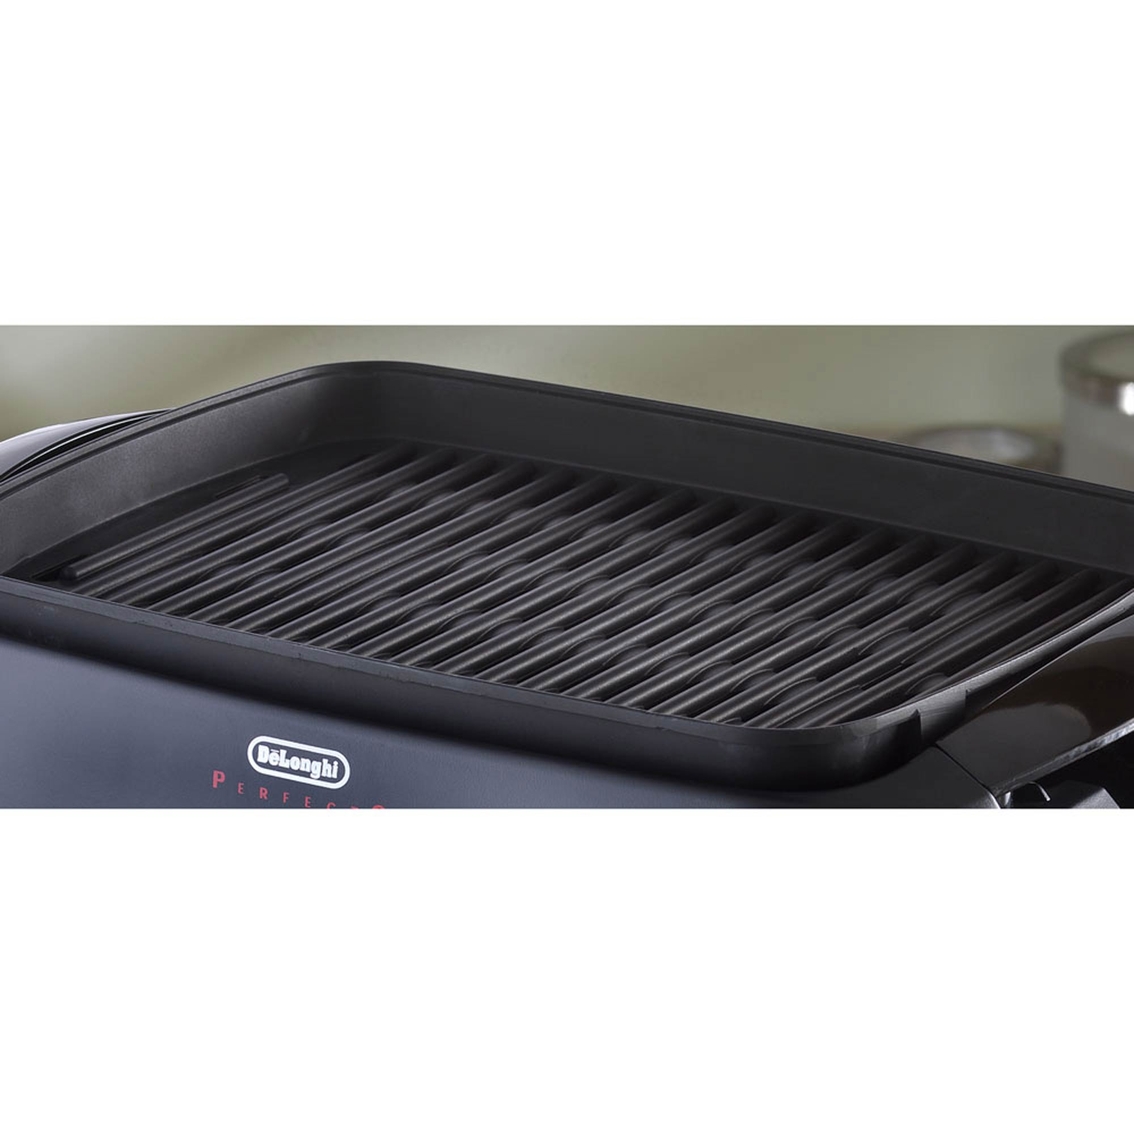 Delonghi Healthy Indoor Grill with Die Cast Aluminum Nonstick Cooking Surface - Image 2 of 8